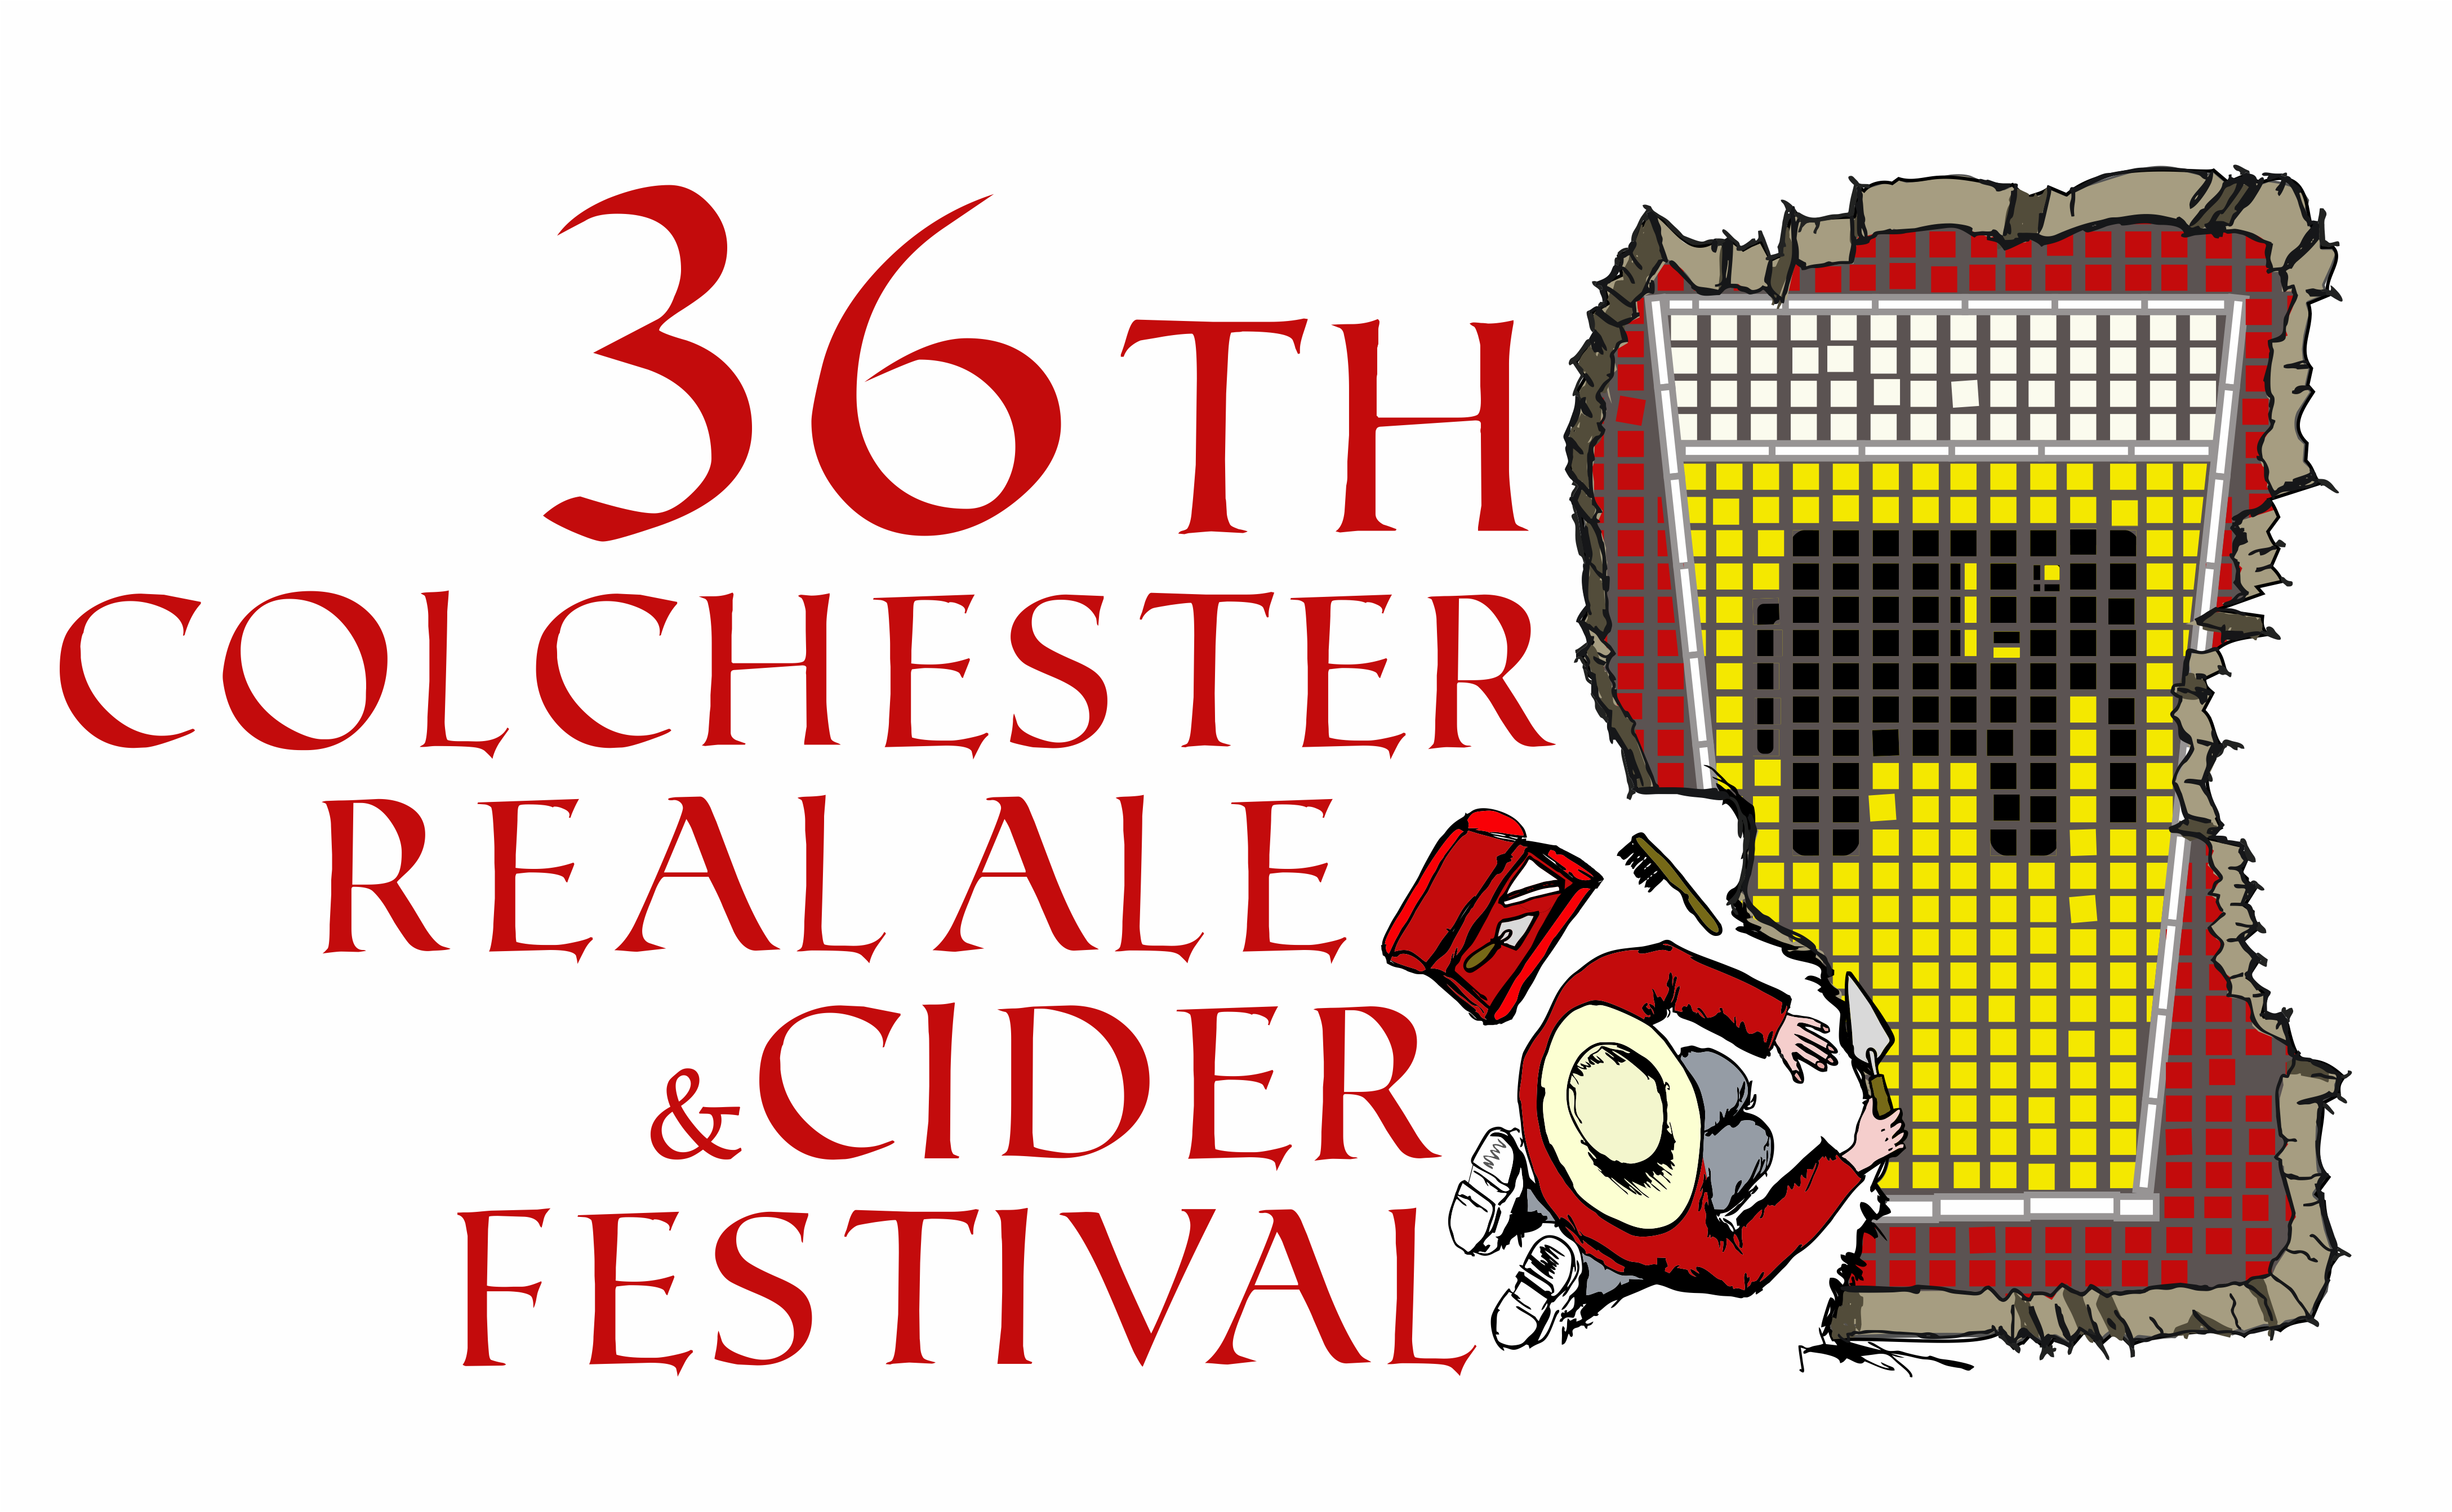 36th Colchester Real Ale and Cider Festival. An archaeologist works on a trench to reveal a mosaic floor which shows a pint glass full of beer with an elephant on the side